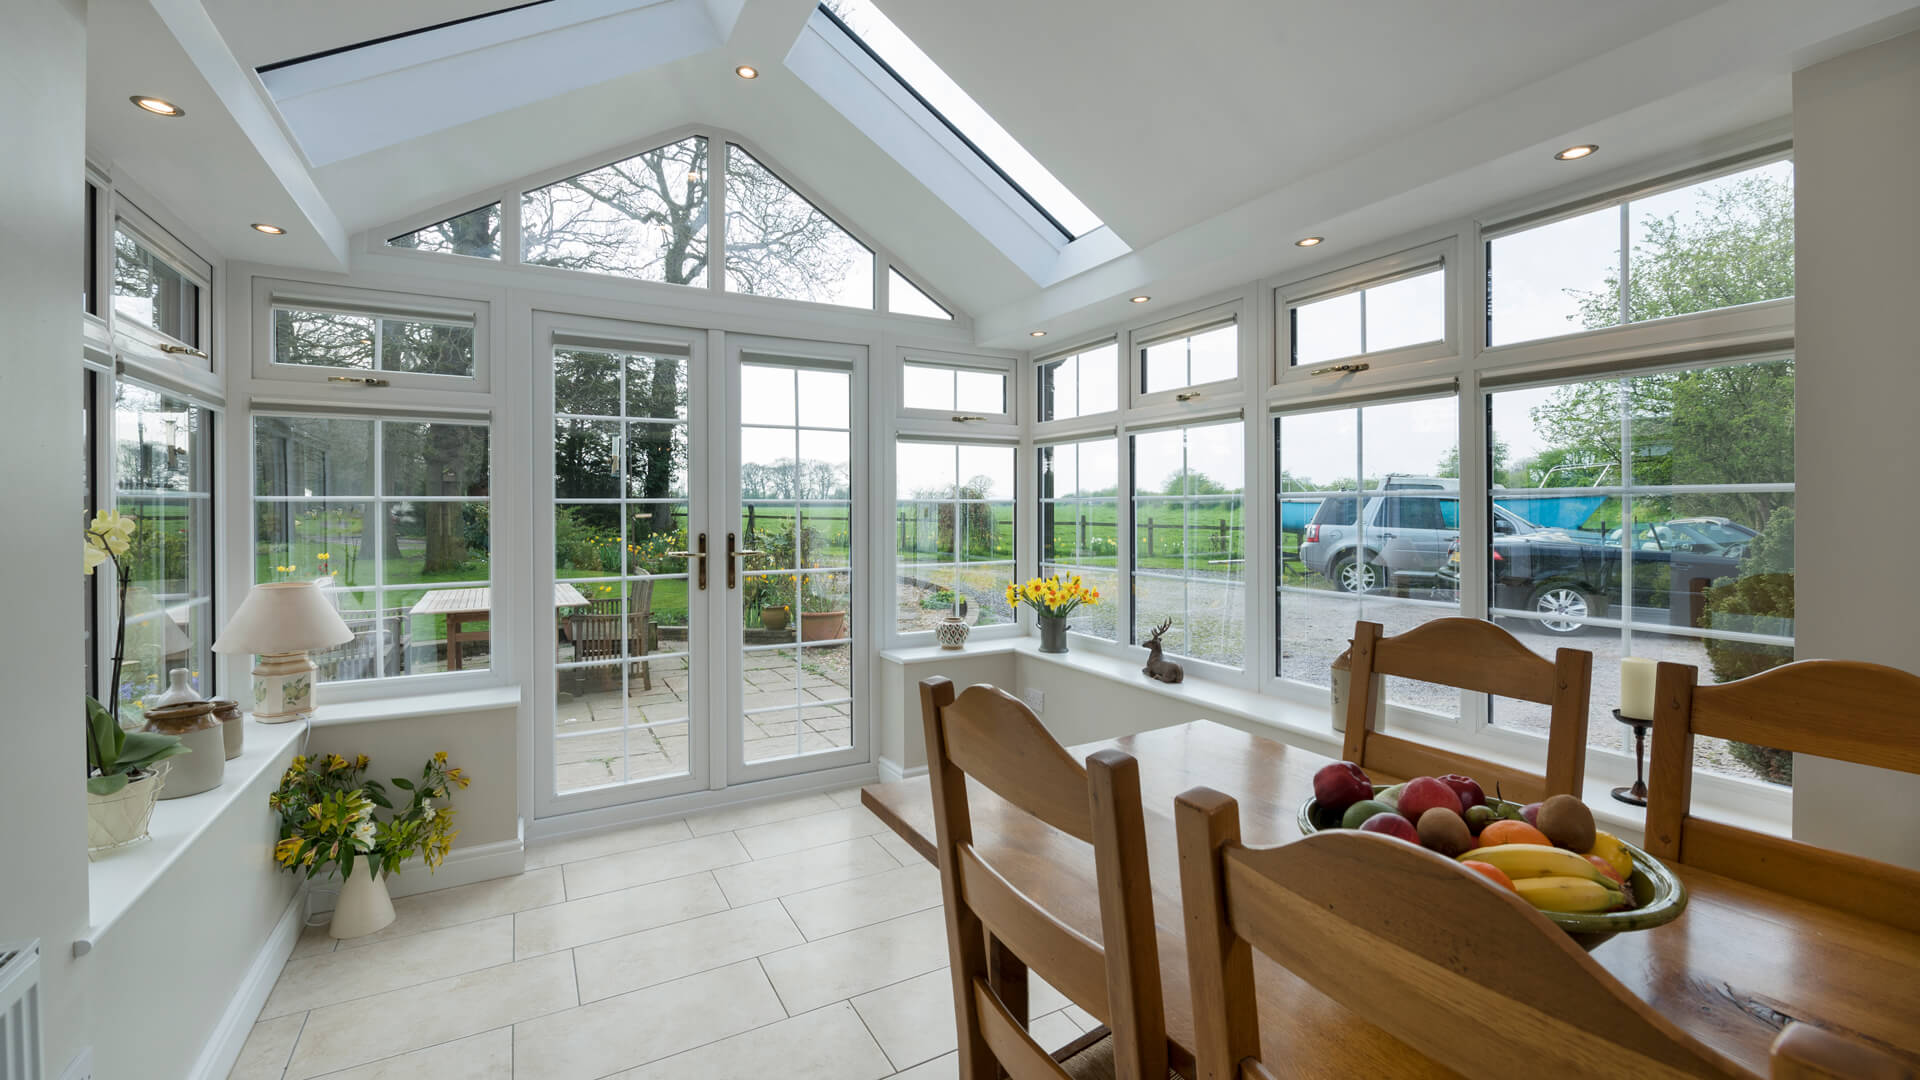 Tiled Roof Conservatory Extension